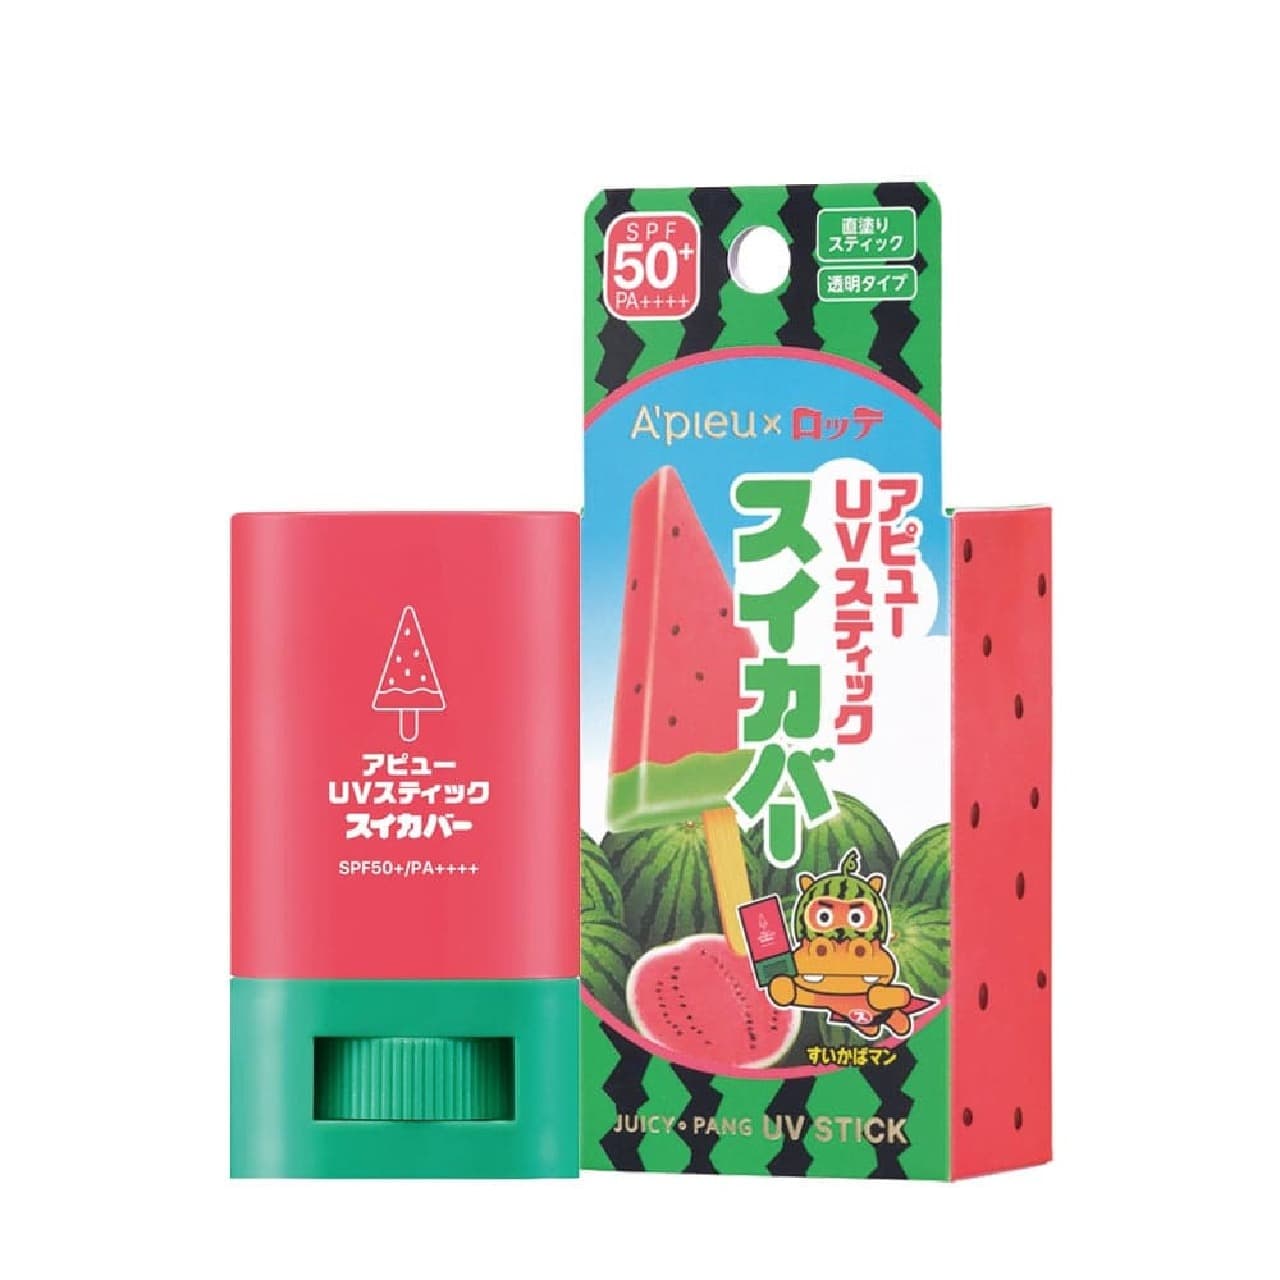 Lotte and Apyu collaborate! Limited “Juicy Pan UV Stick Watermelon Bar/Melon Bar” will be released in limited quantity on March 29th Image 2